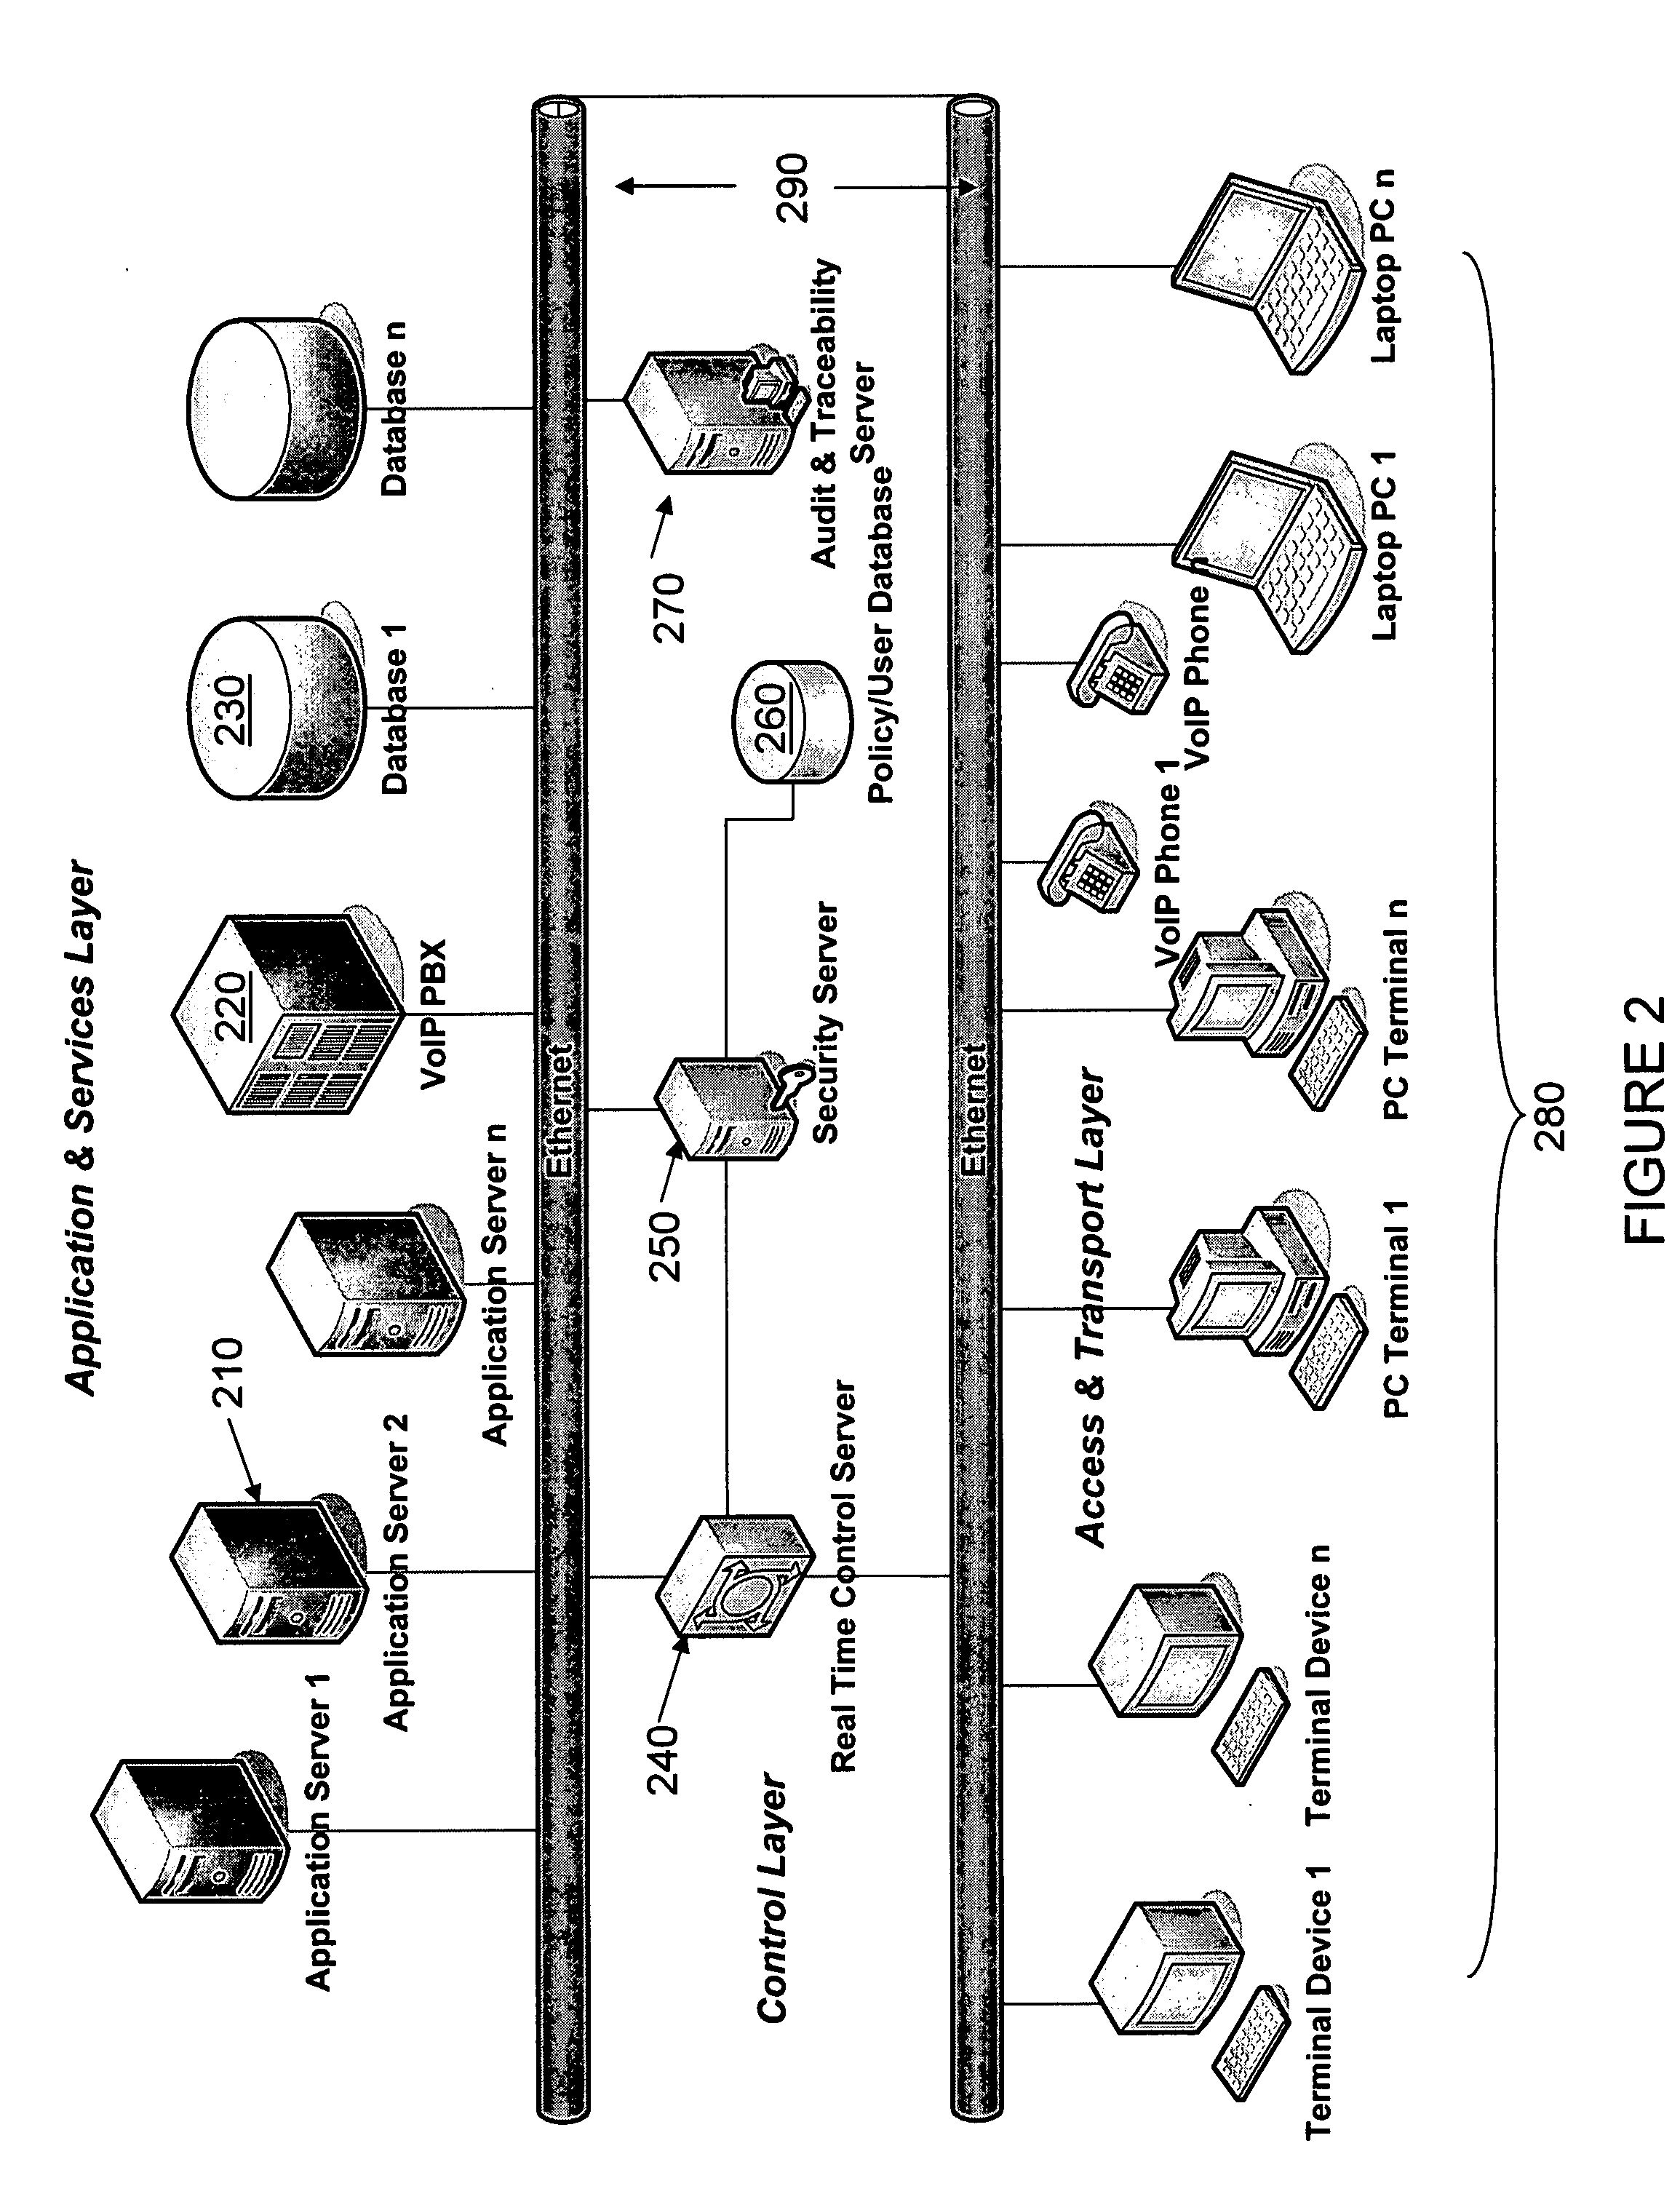 Communication system employing a control layer architecture